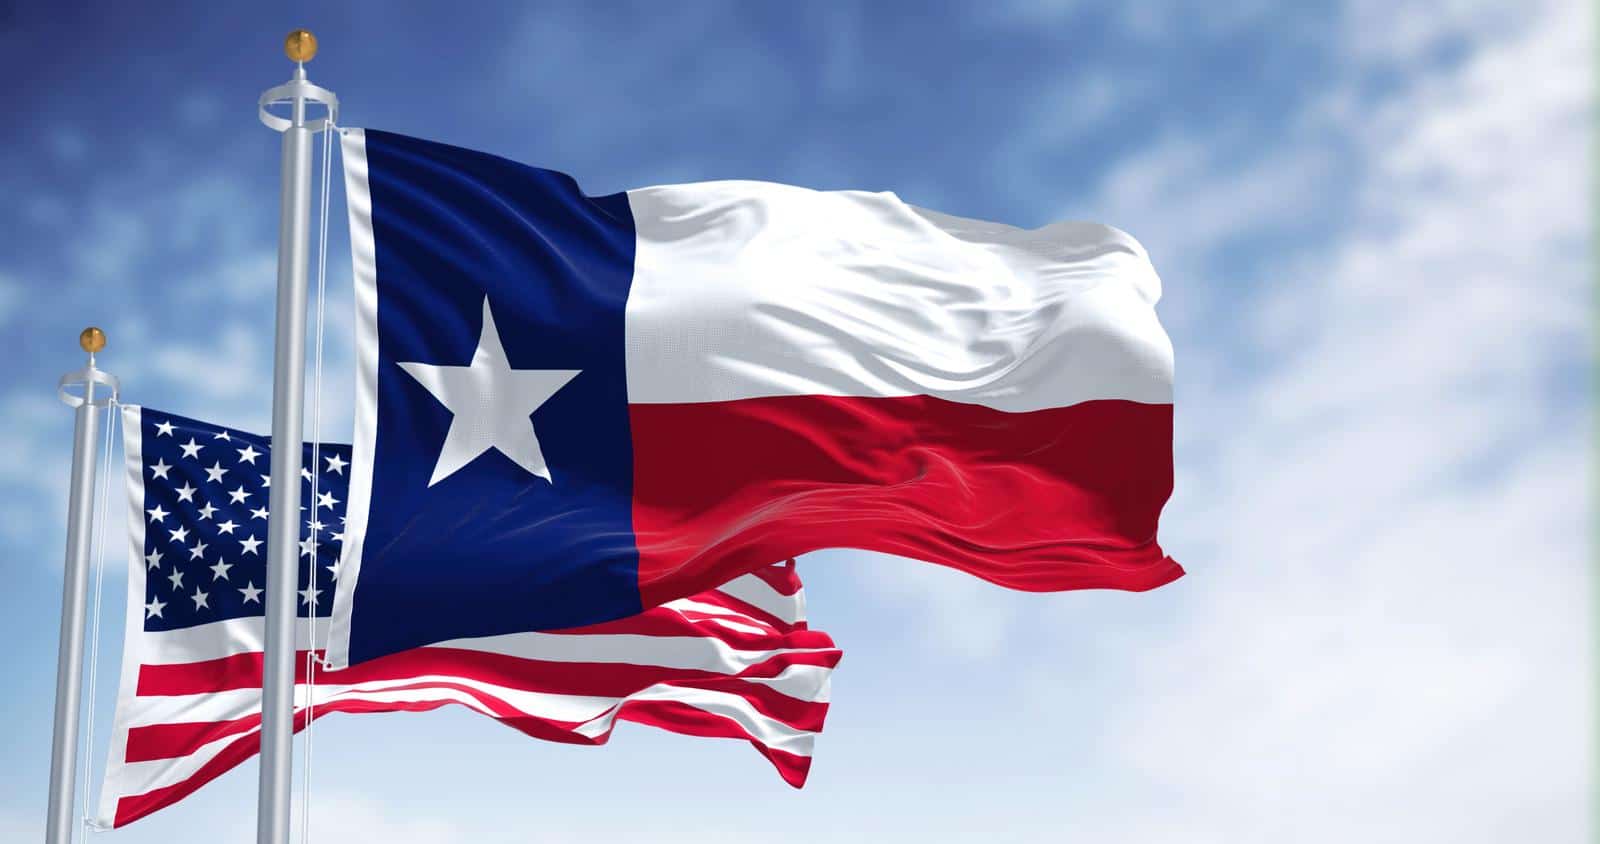 The Texas state flag waving along with the national flag of the United States of America. Texas s a state in the South Central region of the United States.